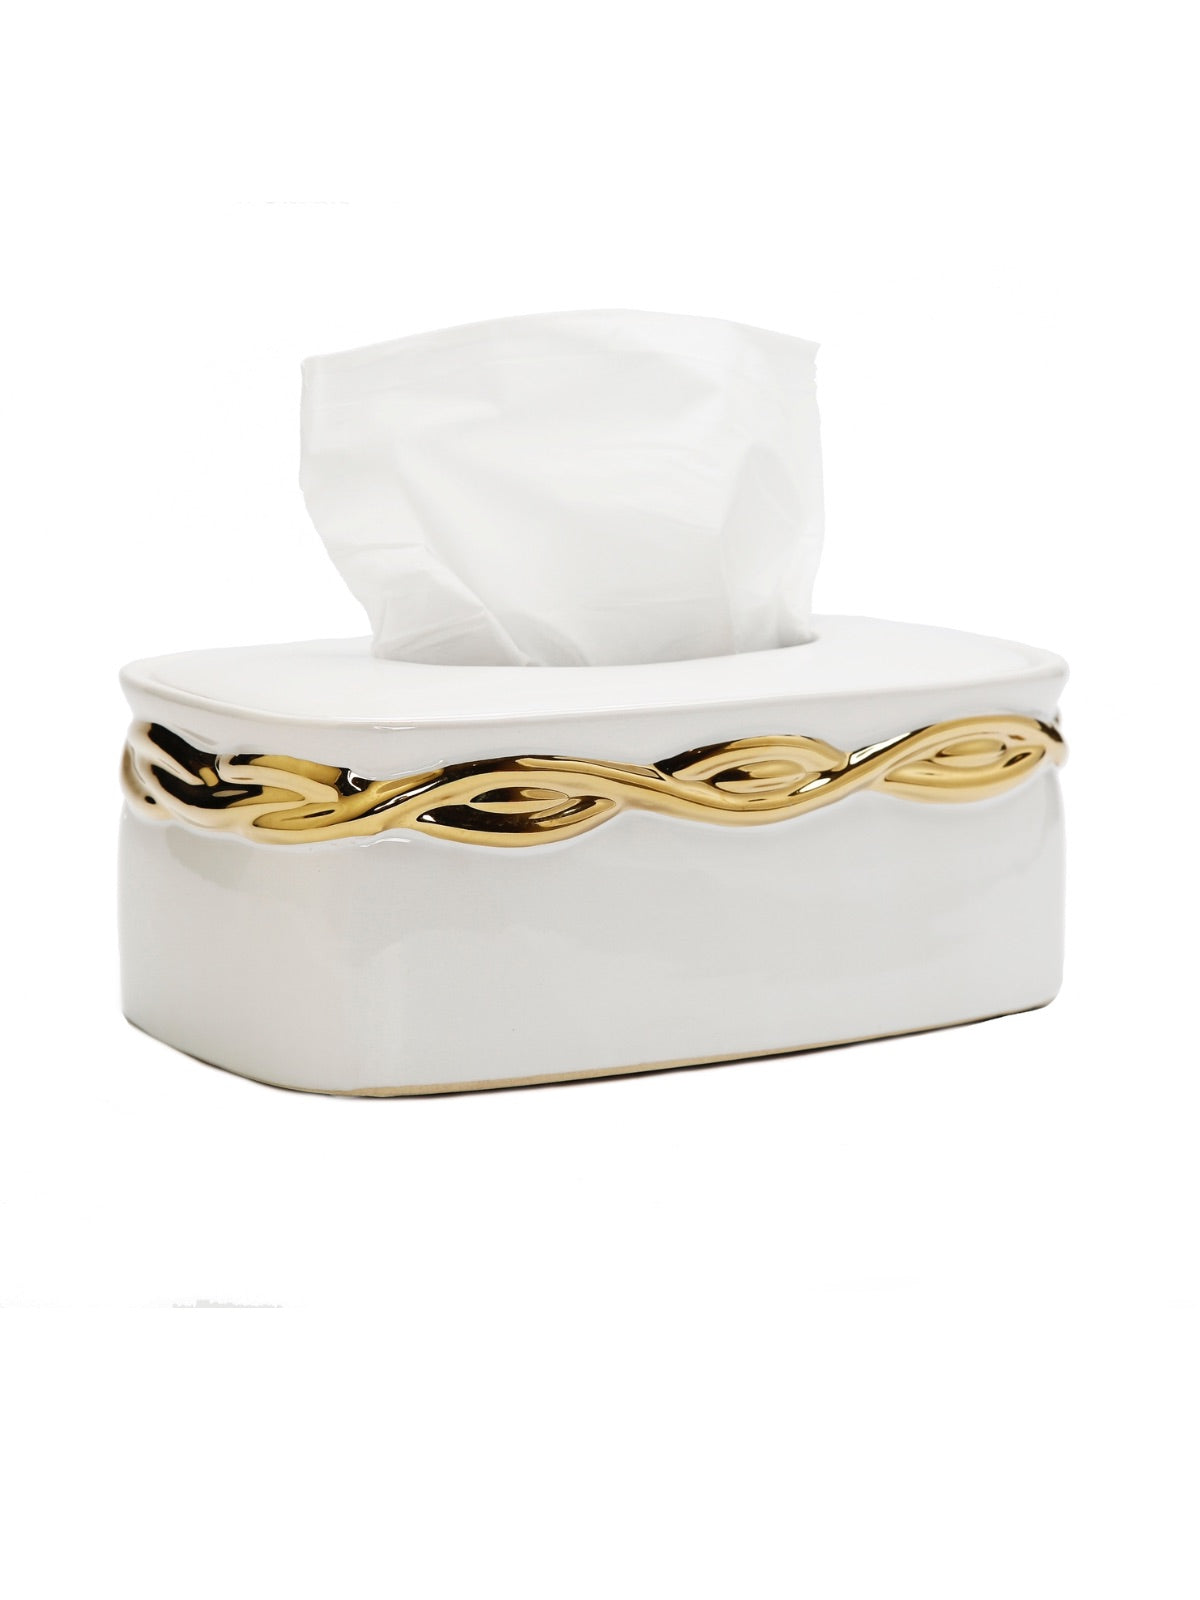 White Ceramic Tissue Box with Stunning Gold Design sold by KYA Home Decor.